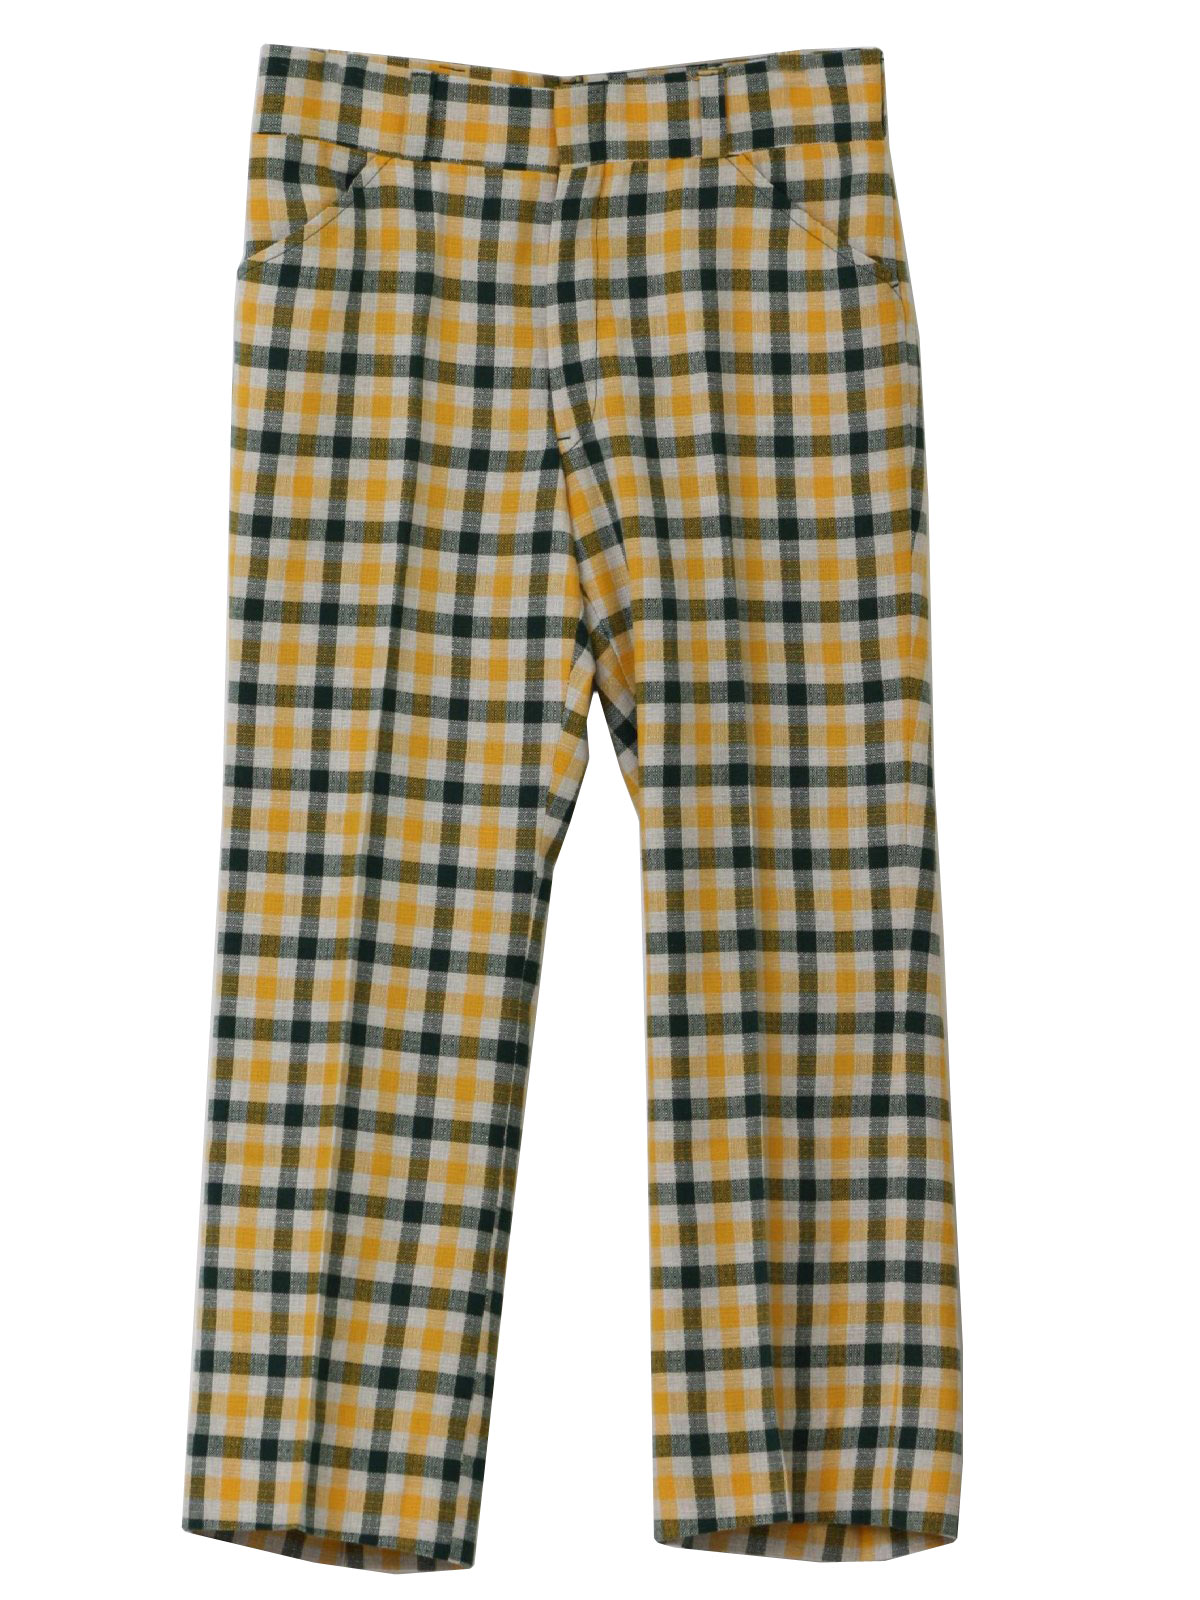 1970's Vintage Asher Pants: 70s -Asher- Mens yellow, green and white ...